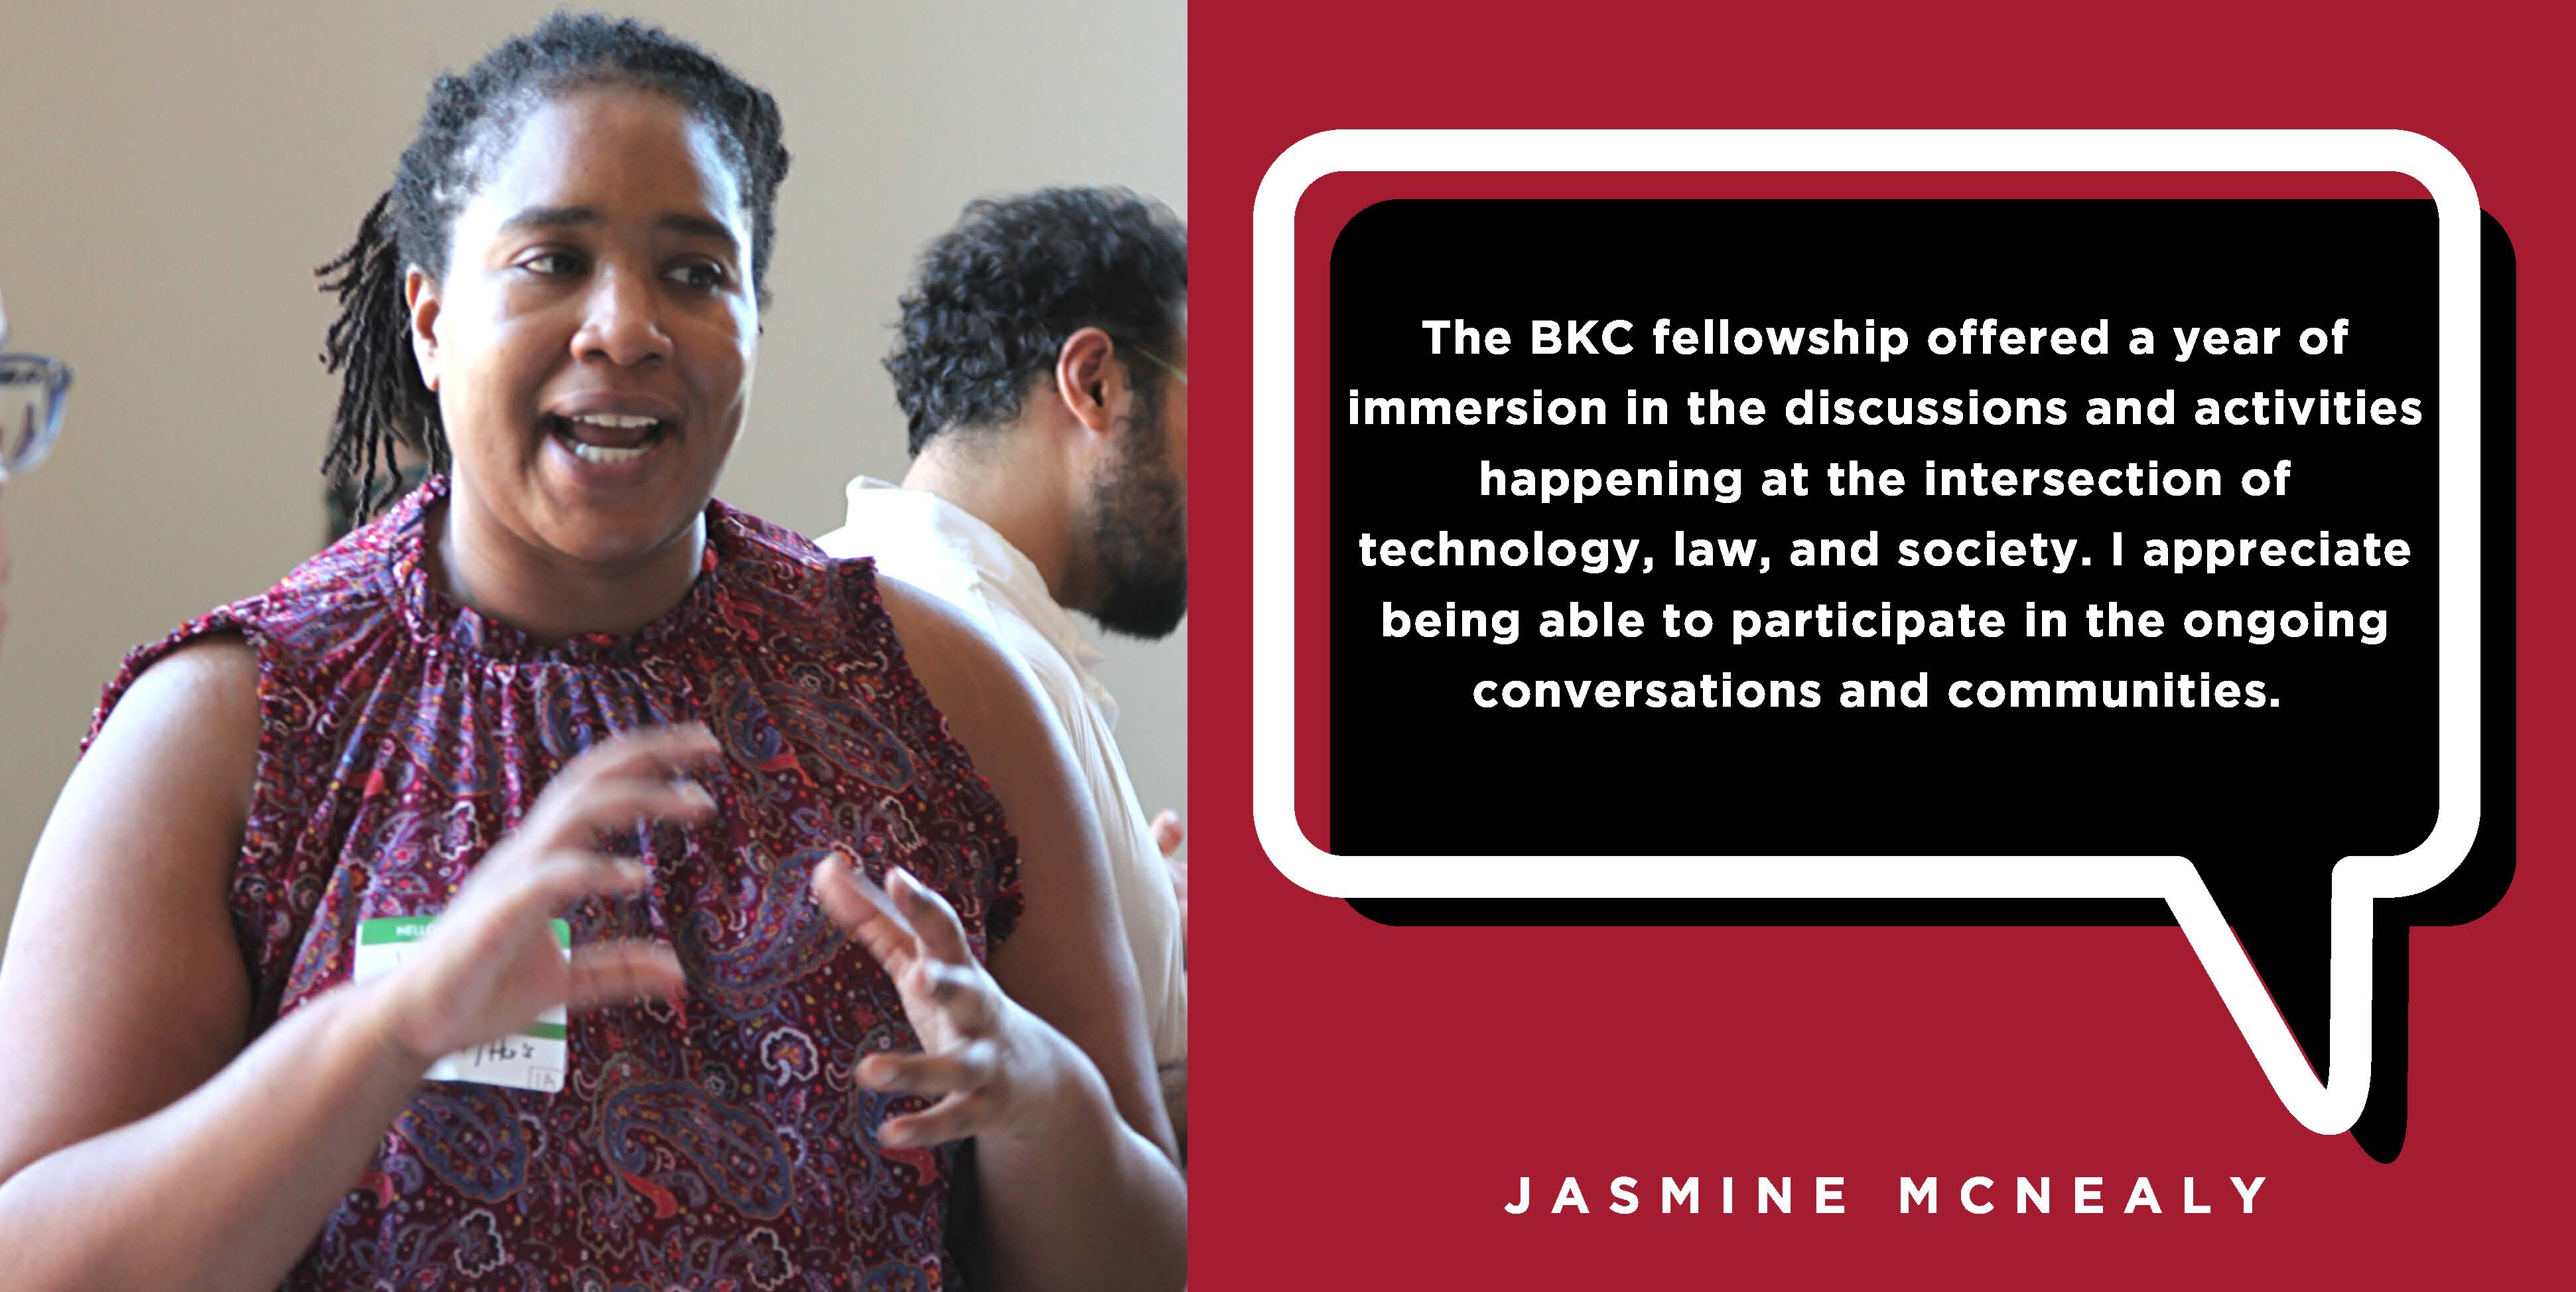 The BKC fellowship offered a year of immersion in the discussions and activities happening at the intersection of technology, law, and society. I appreciate being able to participate in the ongoing conversations and communities. - Jasmine McNealy